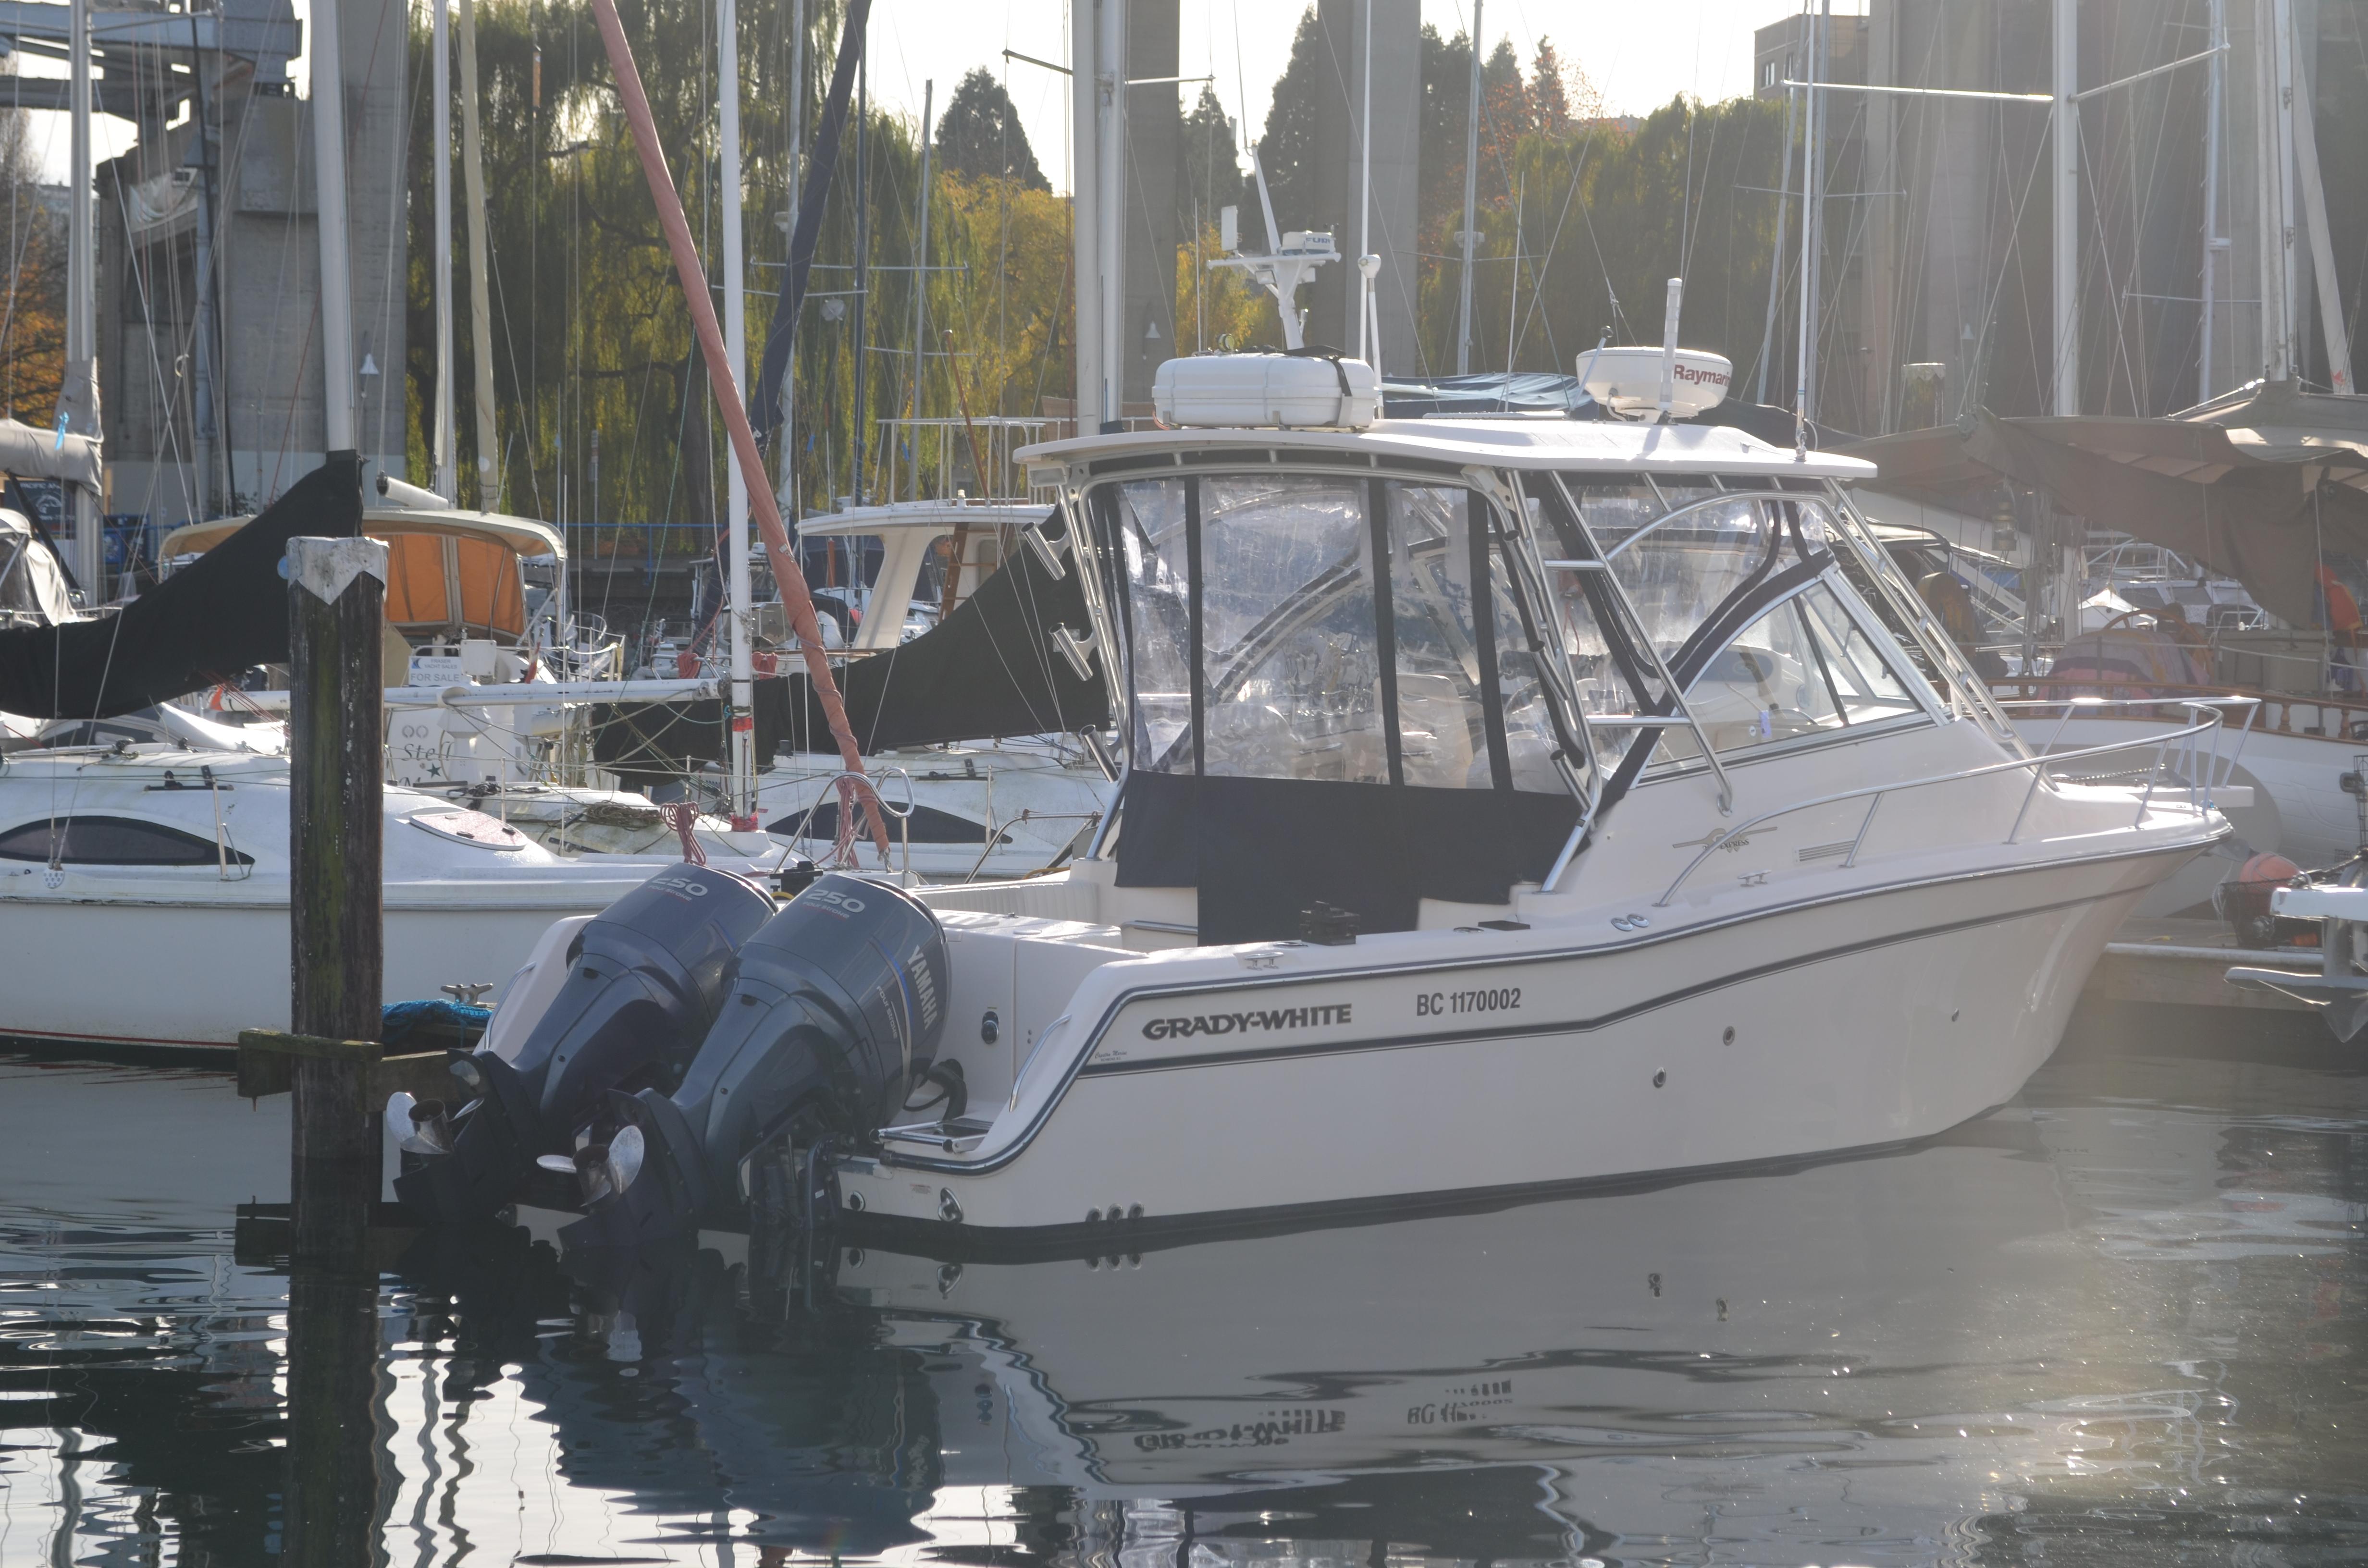 Grady-white boats for sale in Vancouver